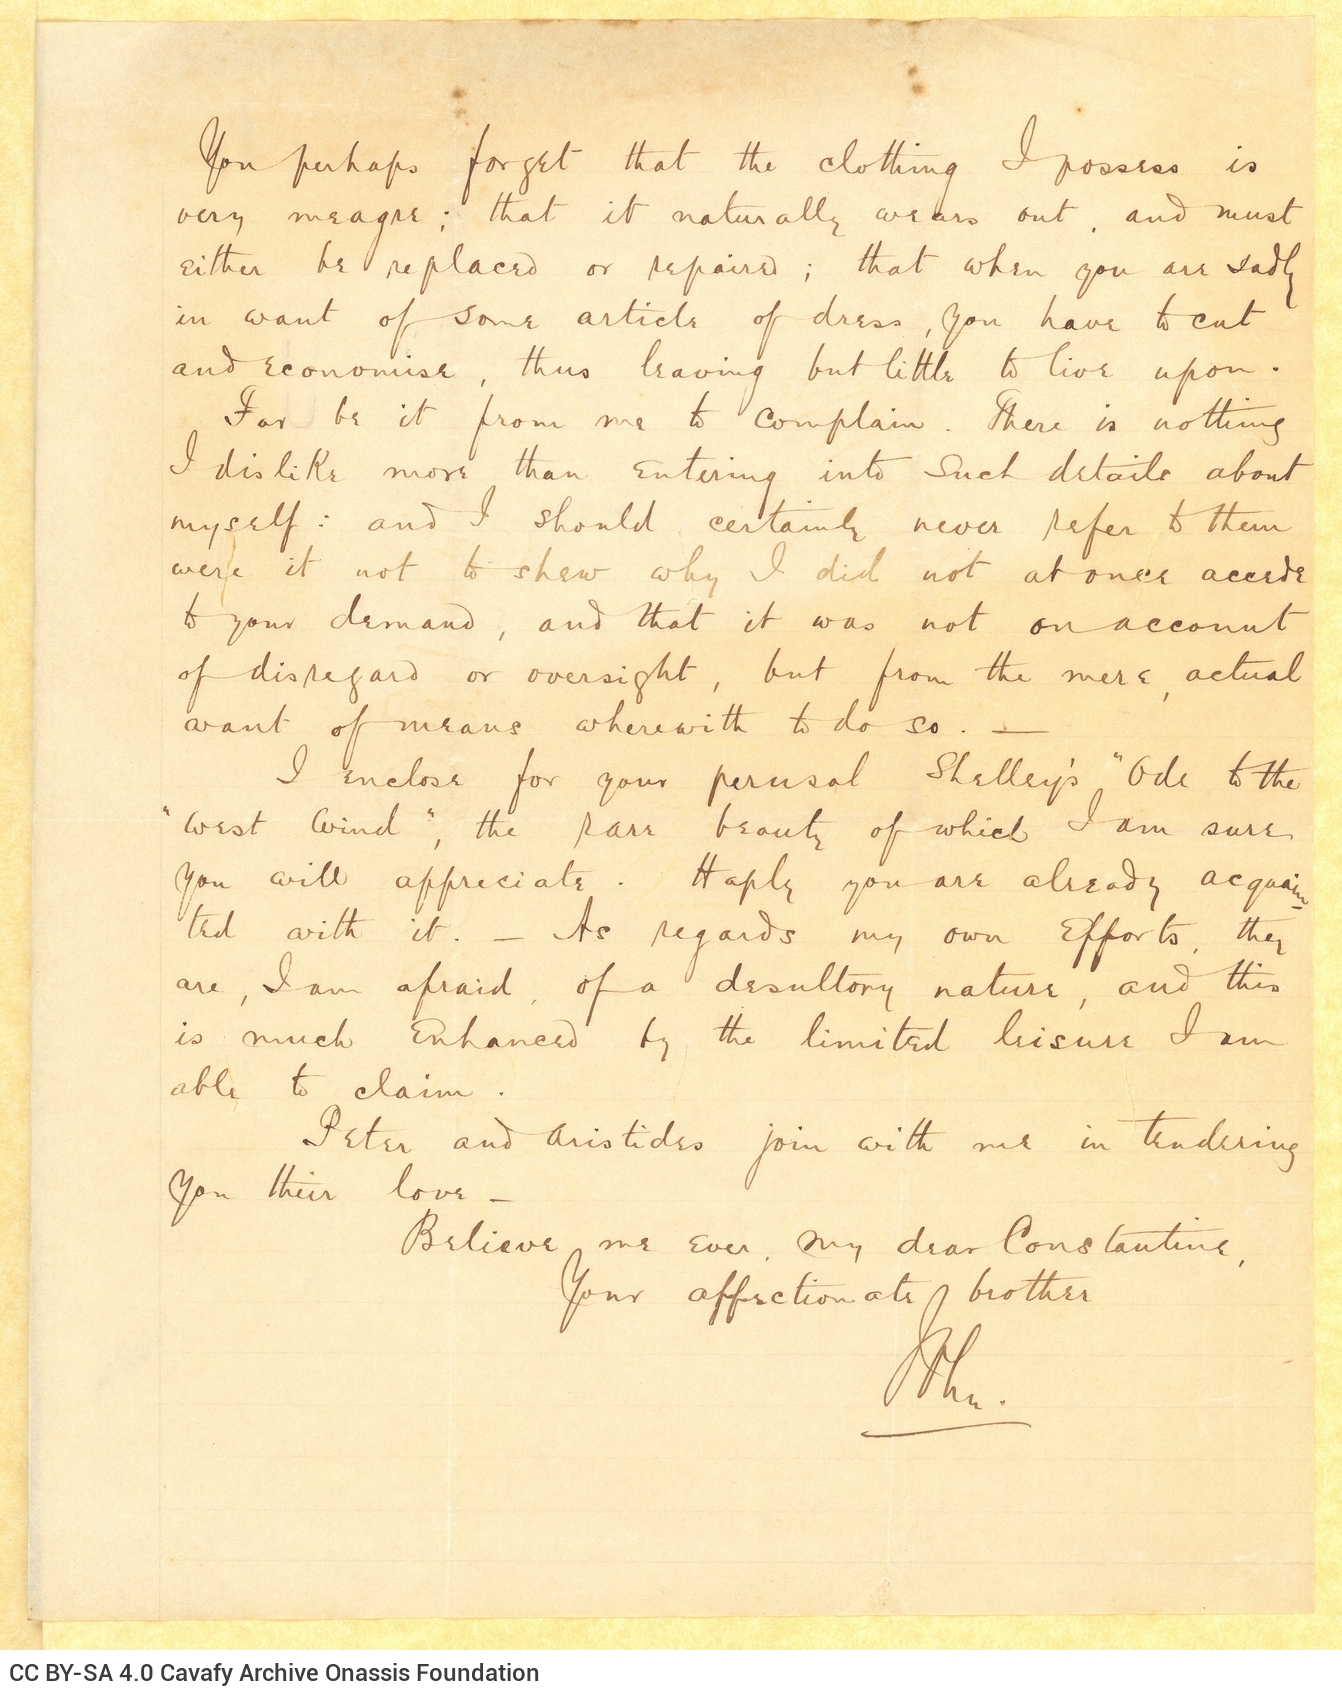 Handwritten letter by John Cavafy to C. P. Cavafy on the first and third pages of a double sheet letterhead of R. J. Moss & C